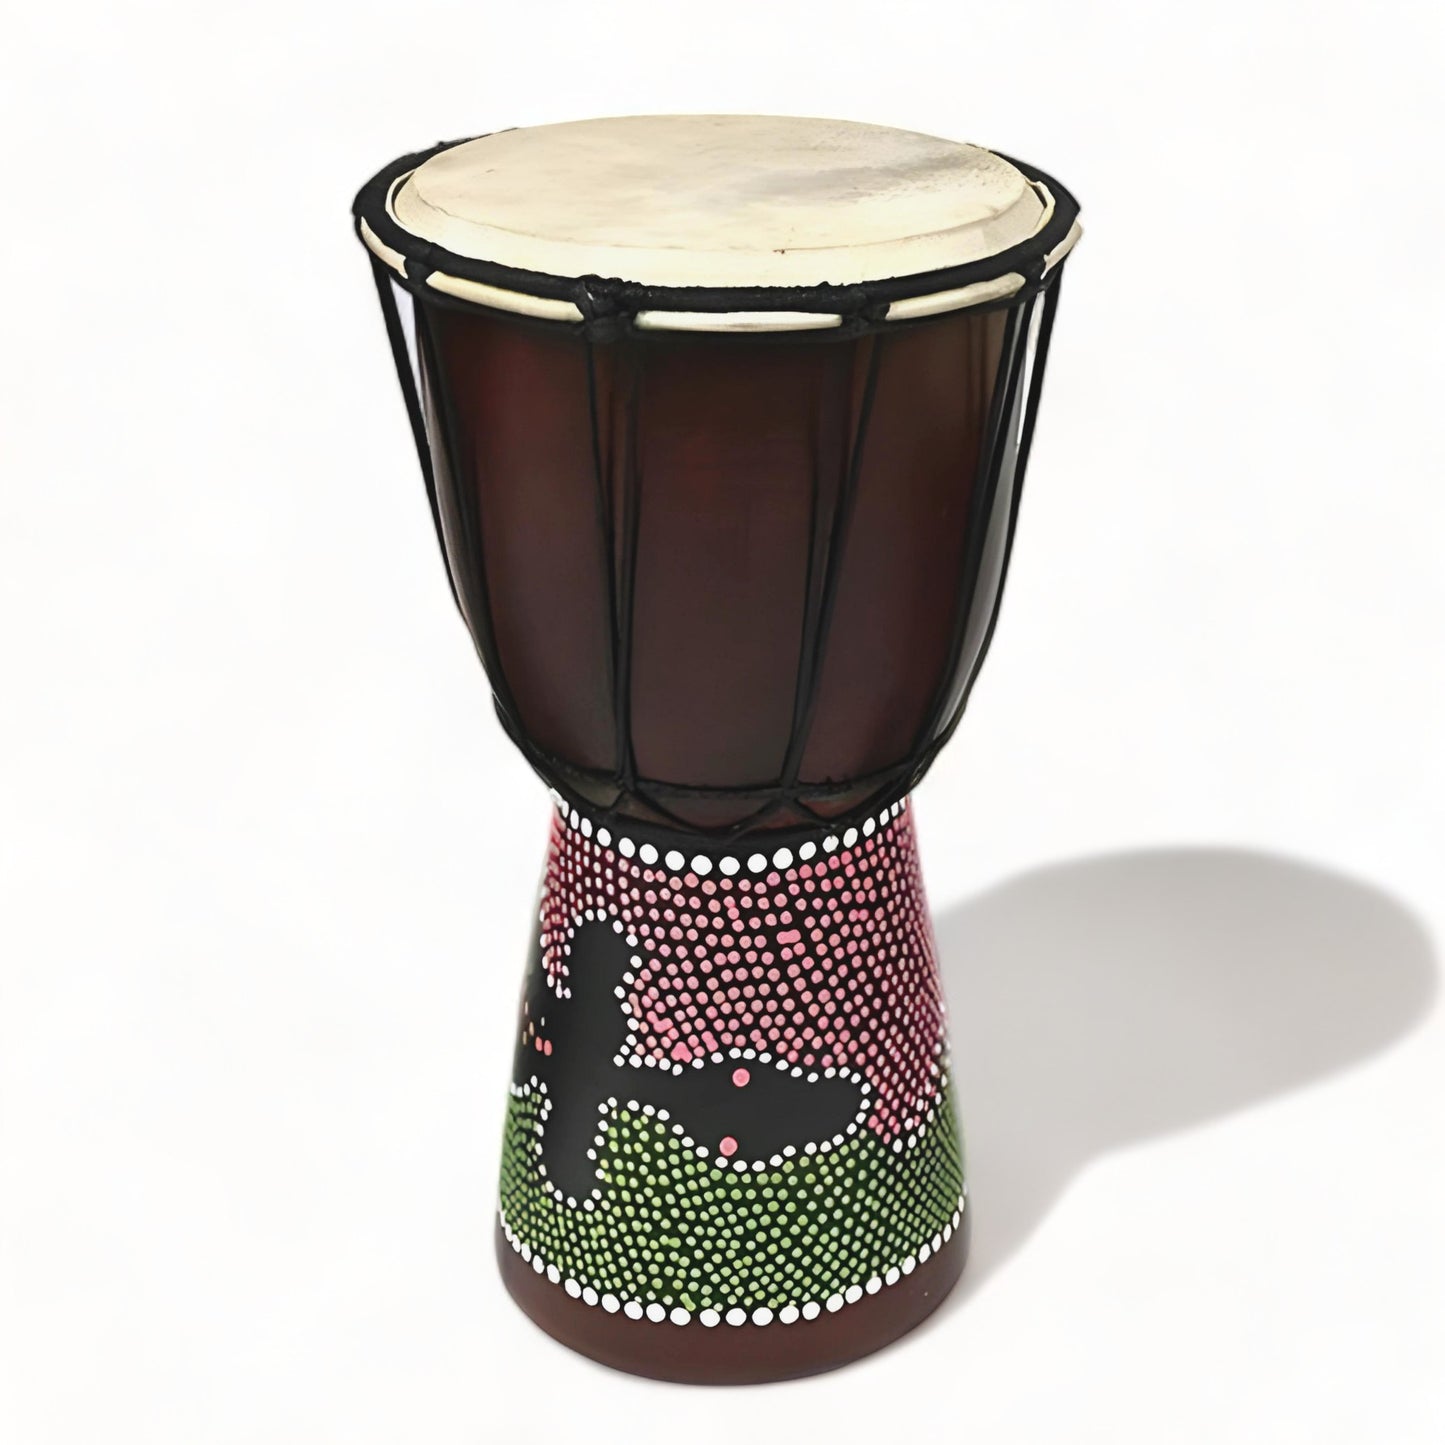 GMP Dot-Painted Mini Djembes | 4 Sizes - 6", 8", 10", 12" Tall